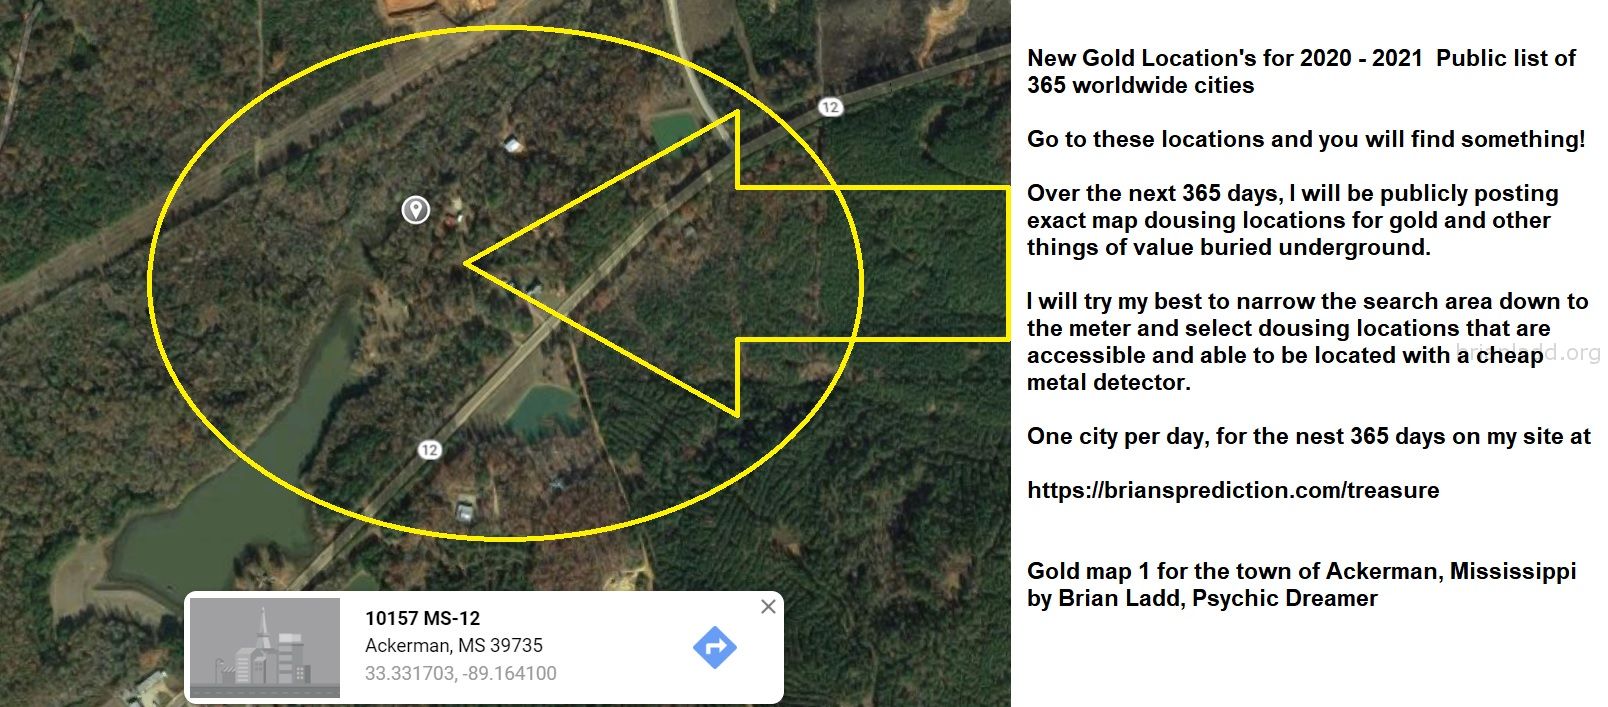 1 Gold map  for the town of Ackerman Mississippi by Brian Ladd Psychic Dreamer
New Gold Location's for 2020 - 2021  Public list of 365 worldwide cities   Go to these locations and you will find something!   Over the next 365 days, I will be publicly posting exact map dousing locations for gold and other things of value buried underground.     I will try my best to narrow the search area down to the meter and select dousing locations that are accessible and able to be located with a cheap metal detector. One city per day, for the nest 365 days on my site at:  https://briansprediction.com/treasure  Want me to find a private location for you for anything?  Order a private reading today at:  https://briansprediction.com/find-me-treasure
